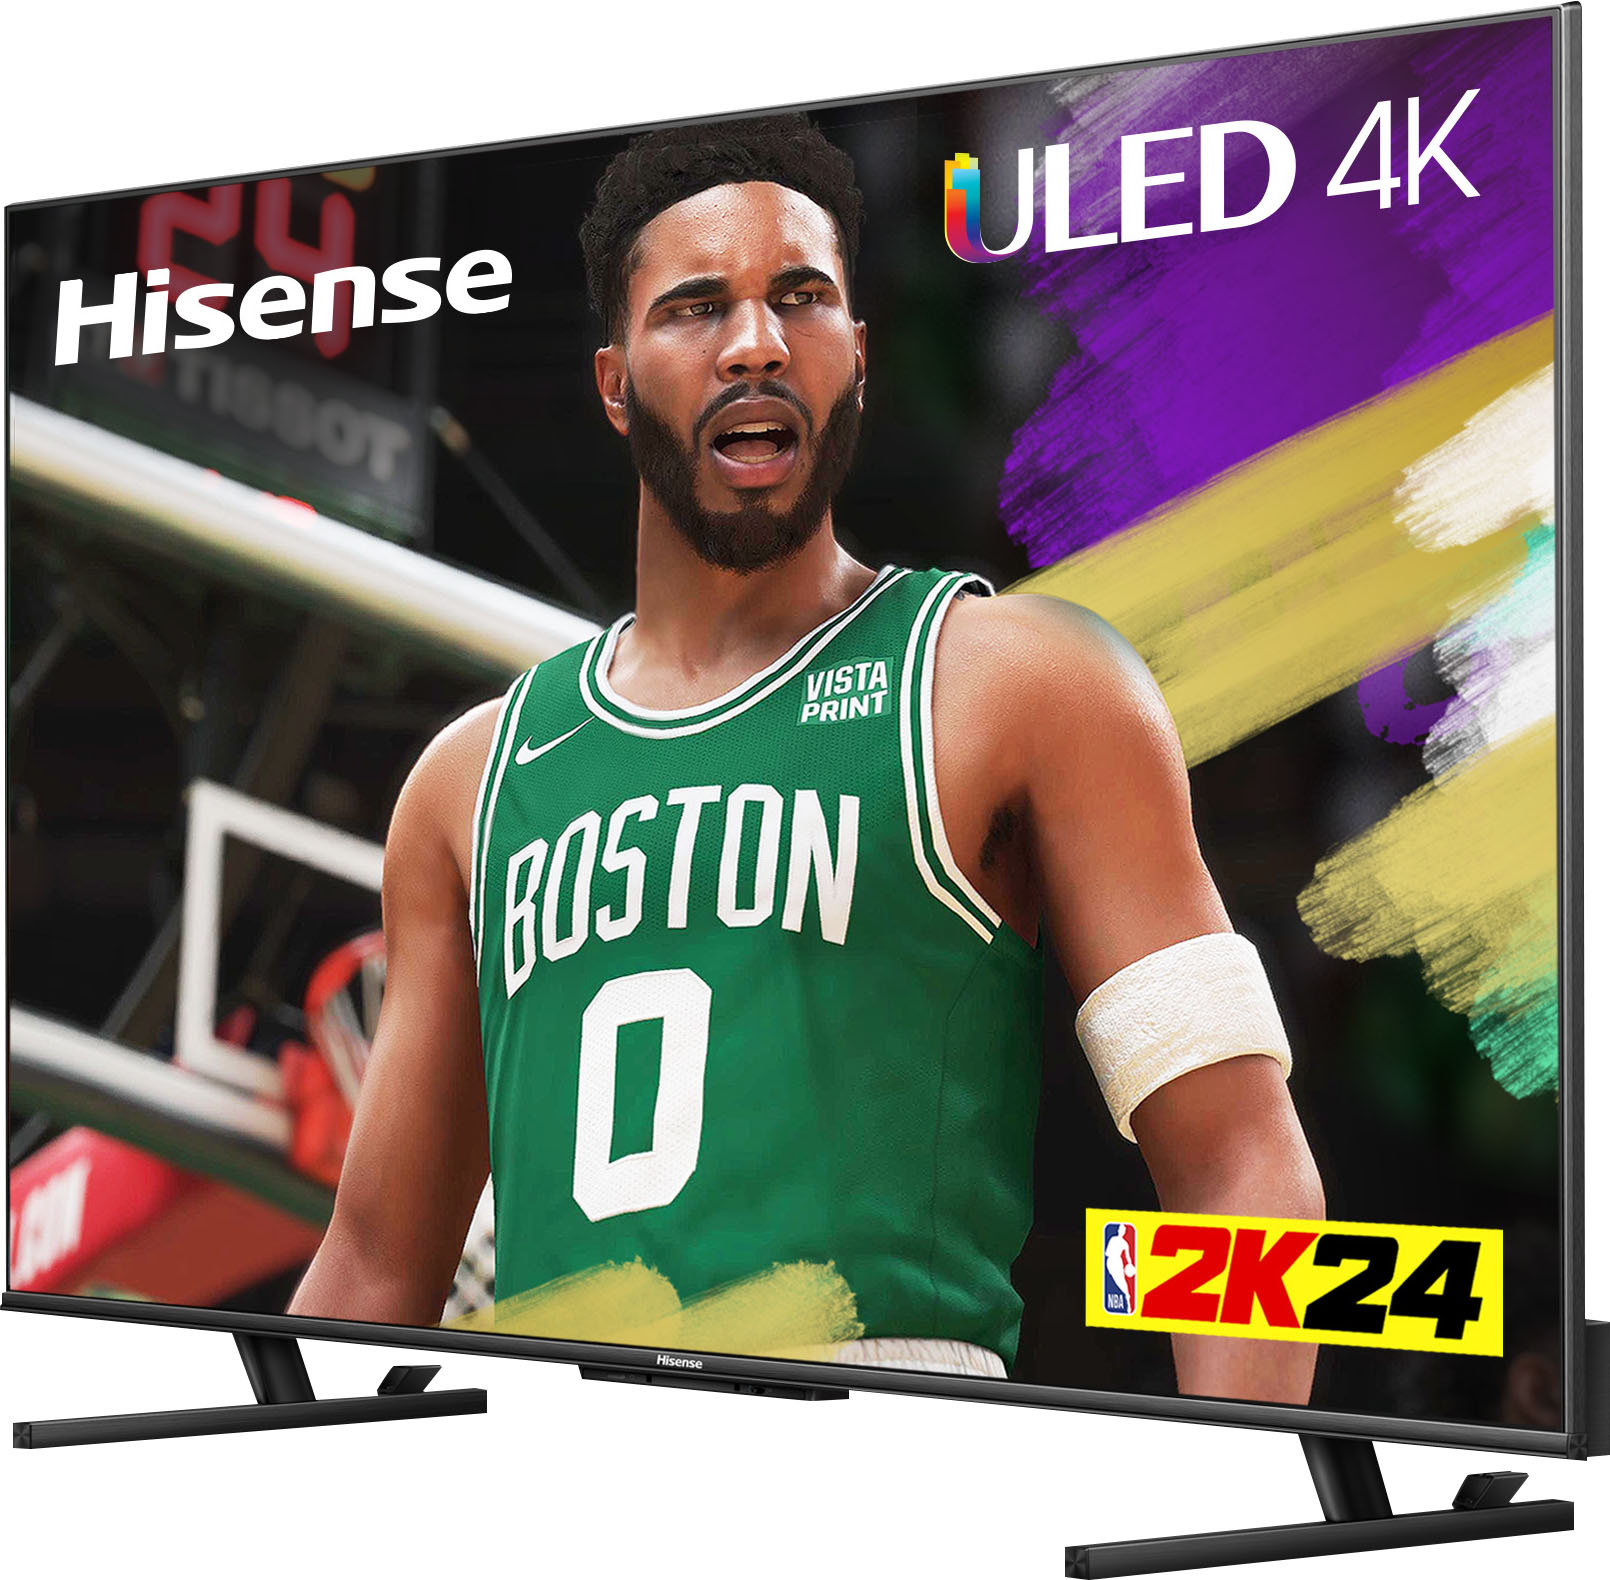 Hisense U6K 4K Mini LED TVs - specifications and features for the USA market